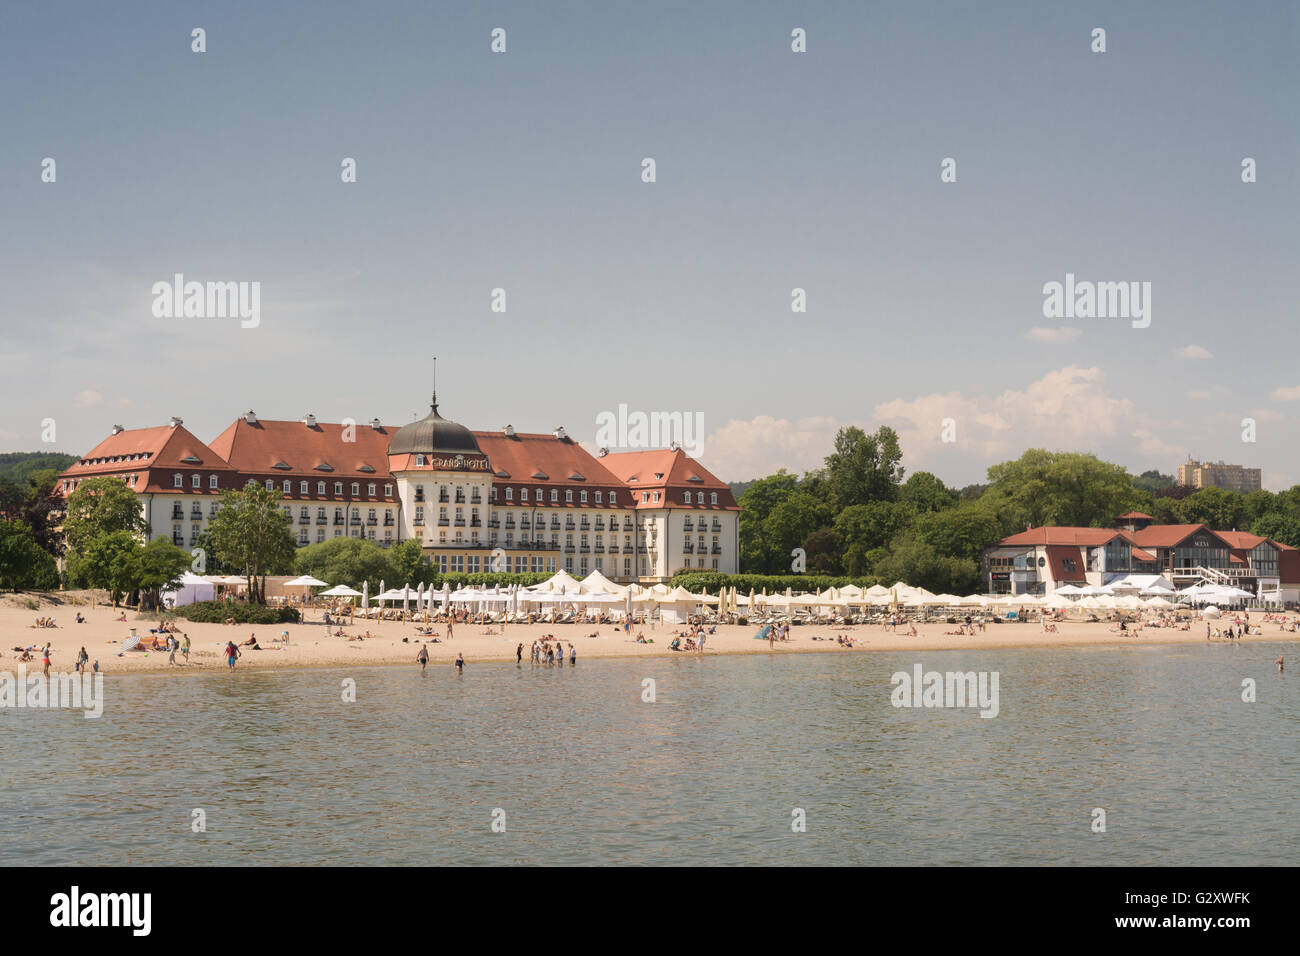 Sopot, Pologne - Sofitel Grand Sopot luxury hotel and beach Banque D'Images